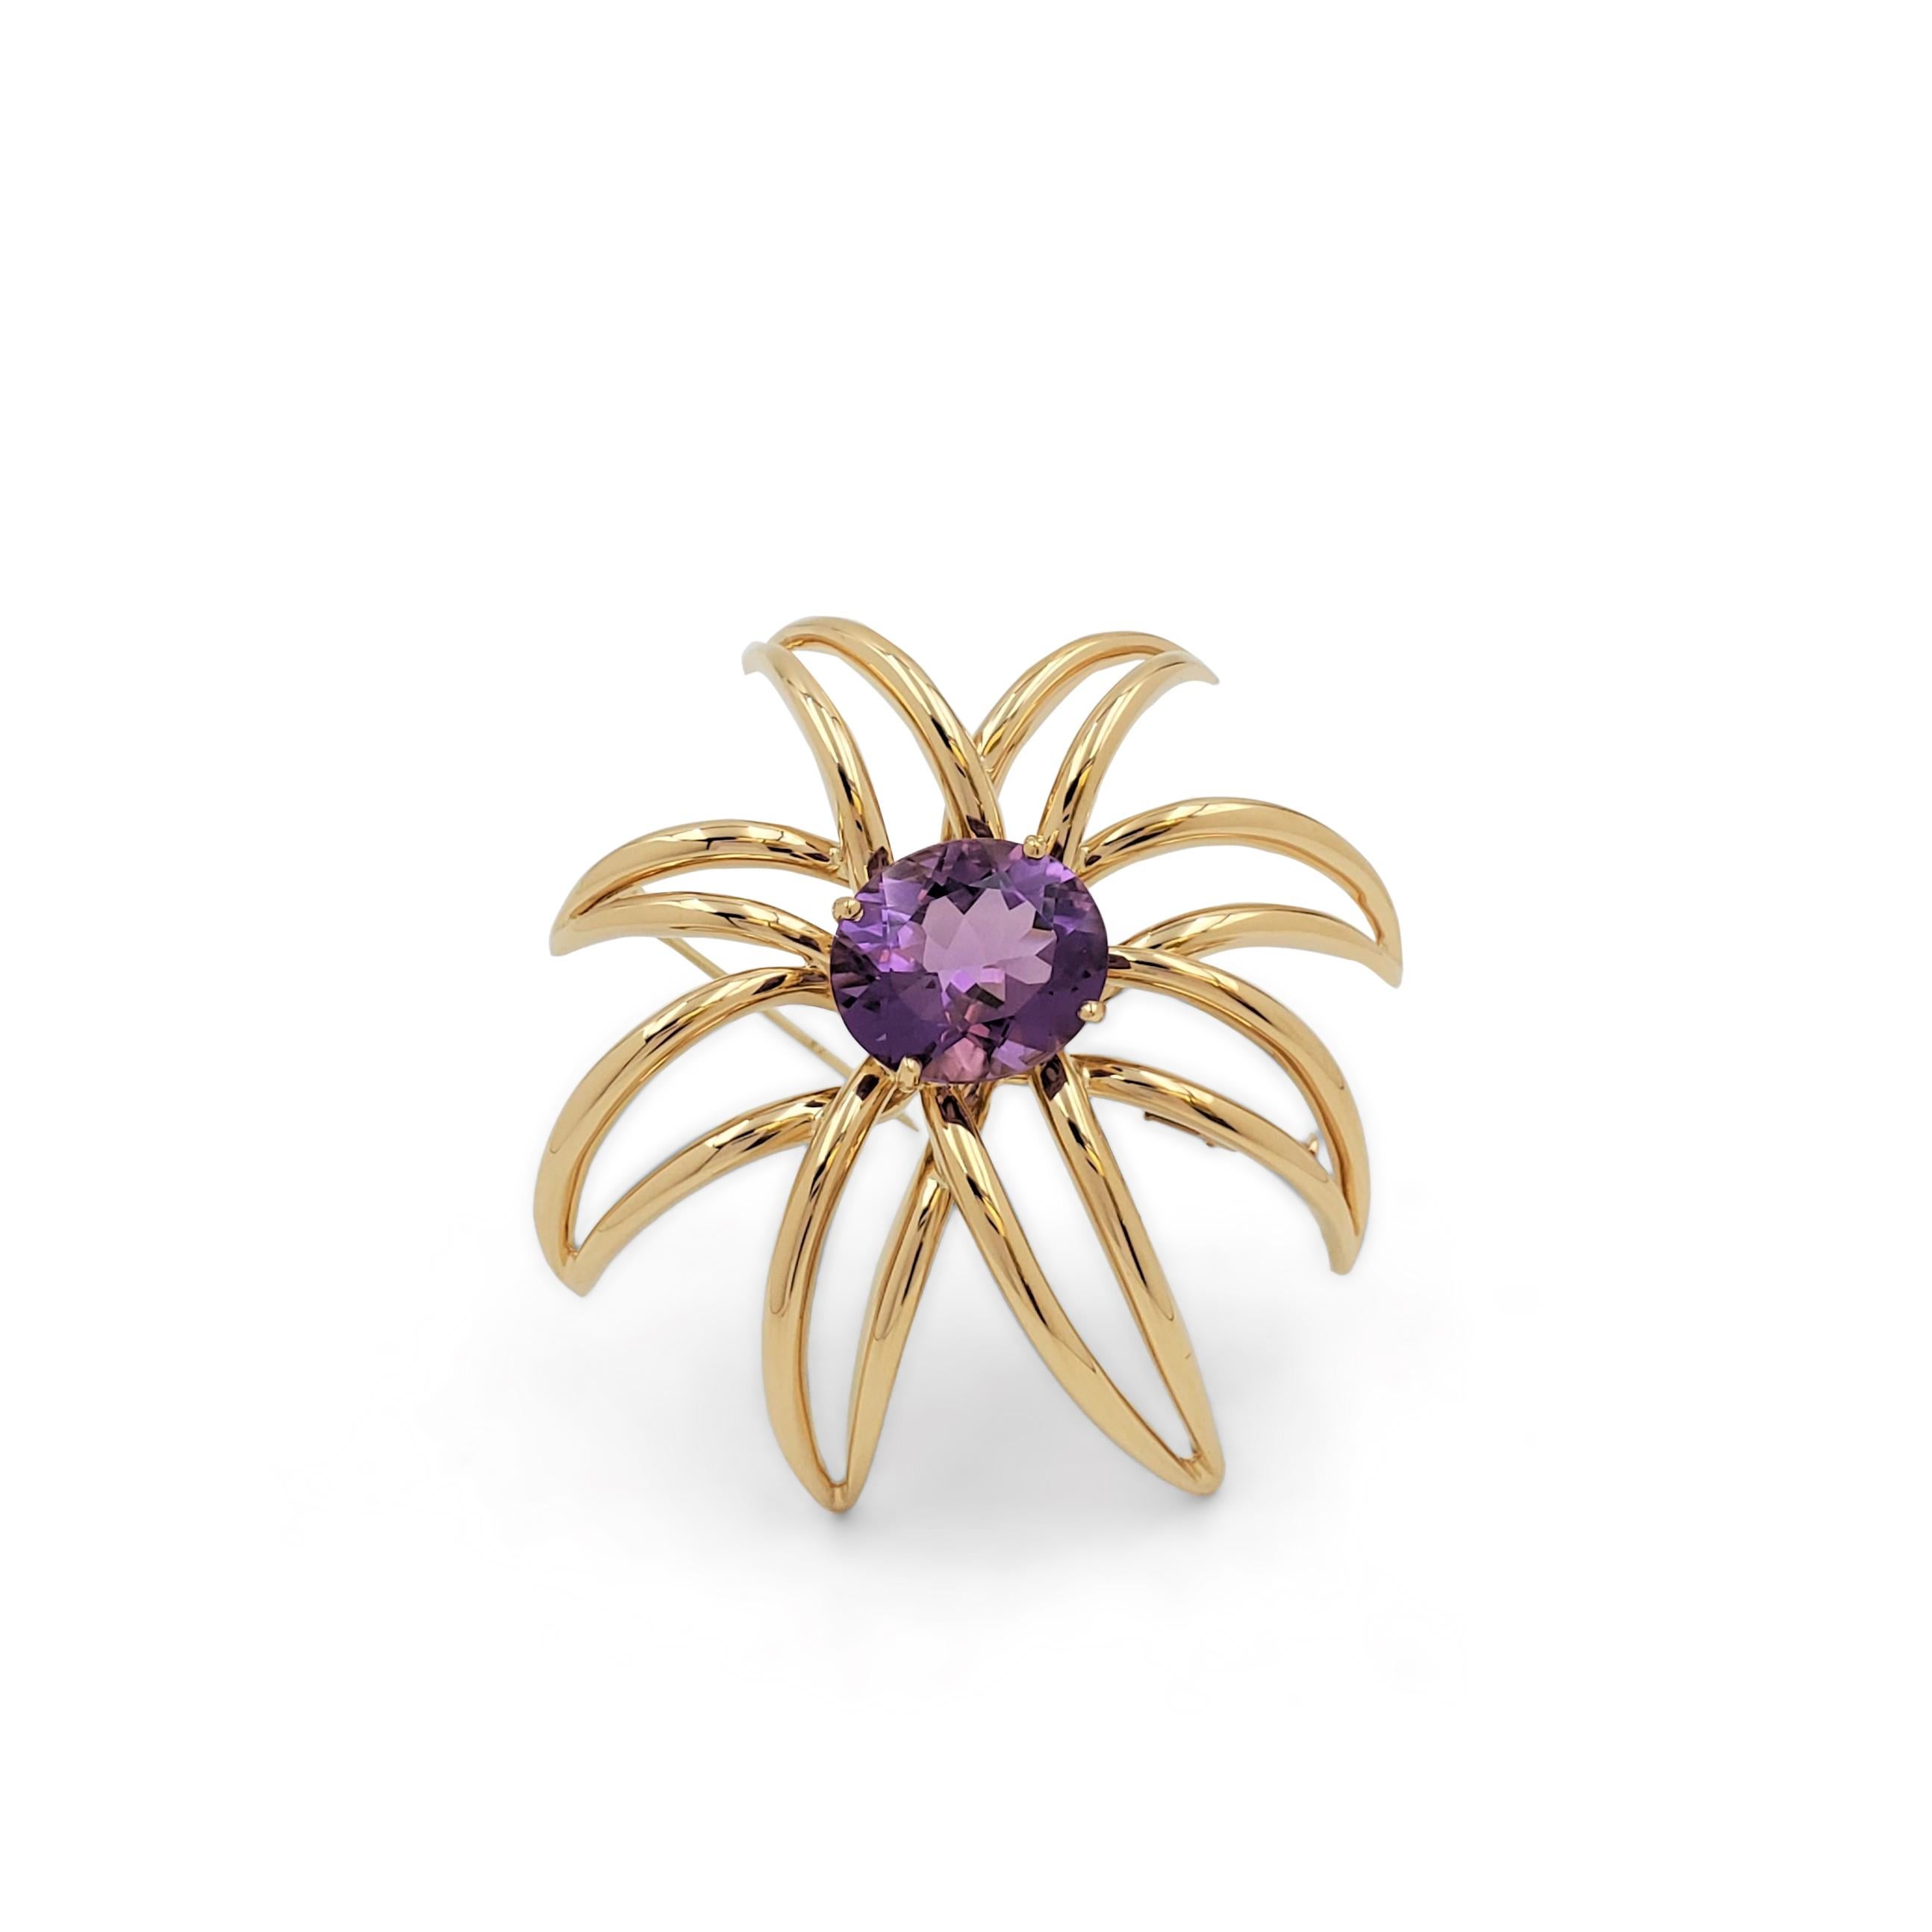 Authentic Tiffany & Co. 'Fireworks' brooch crafted in 18 karat yellow gold features an oval-shaped amethyst stone weighing approximately 7.00-8.00 carats. Signed 1994, Tiffany & Co., 750, Fireworks. The brooch is presented with the original box, no